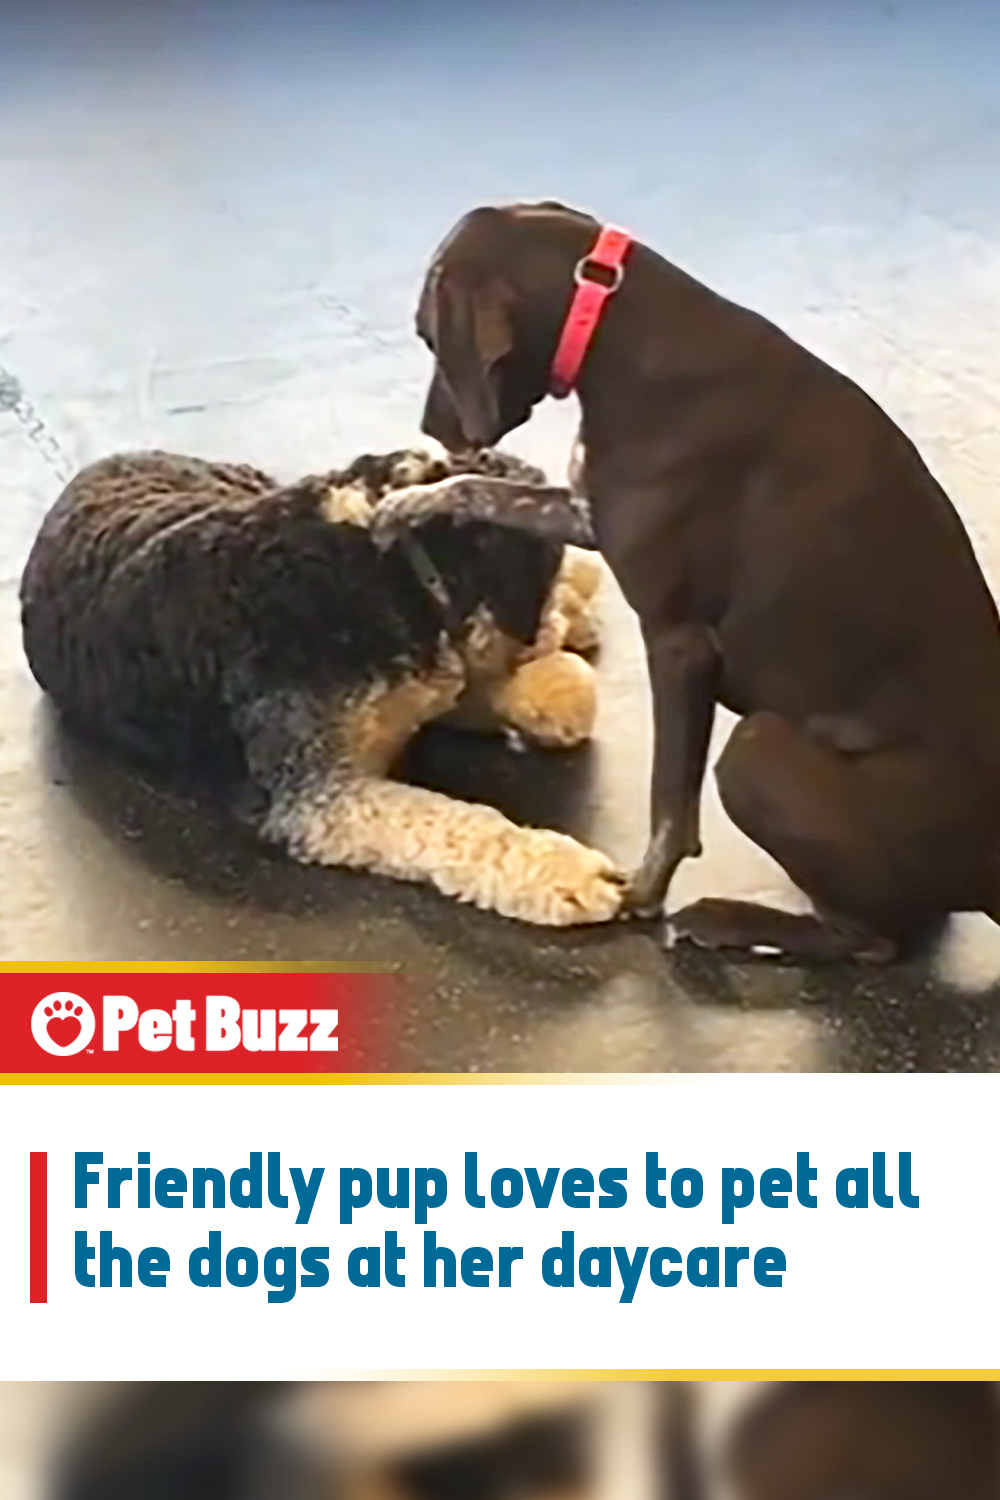 Friendly pup loves to pet all the dogs at her daycare